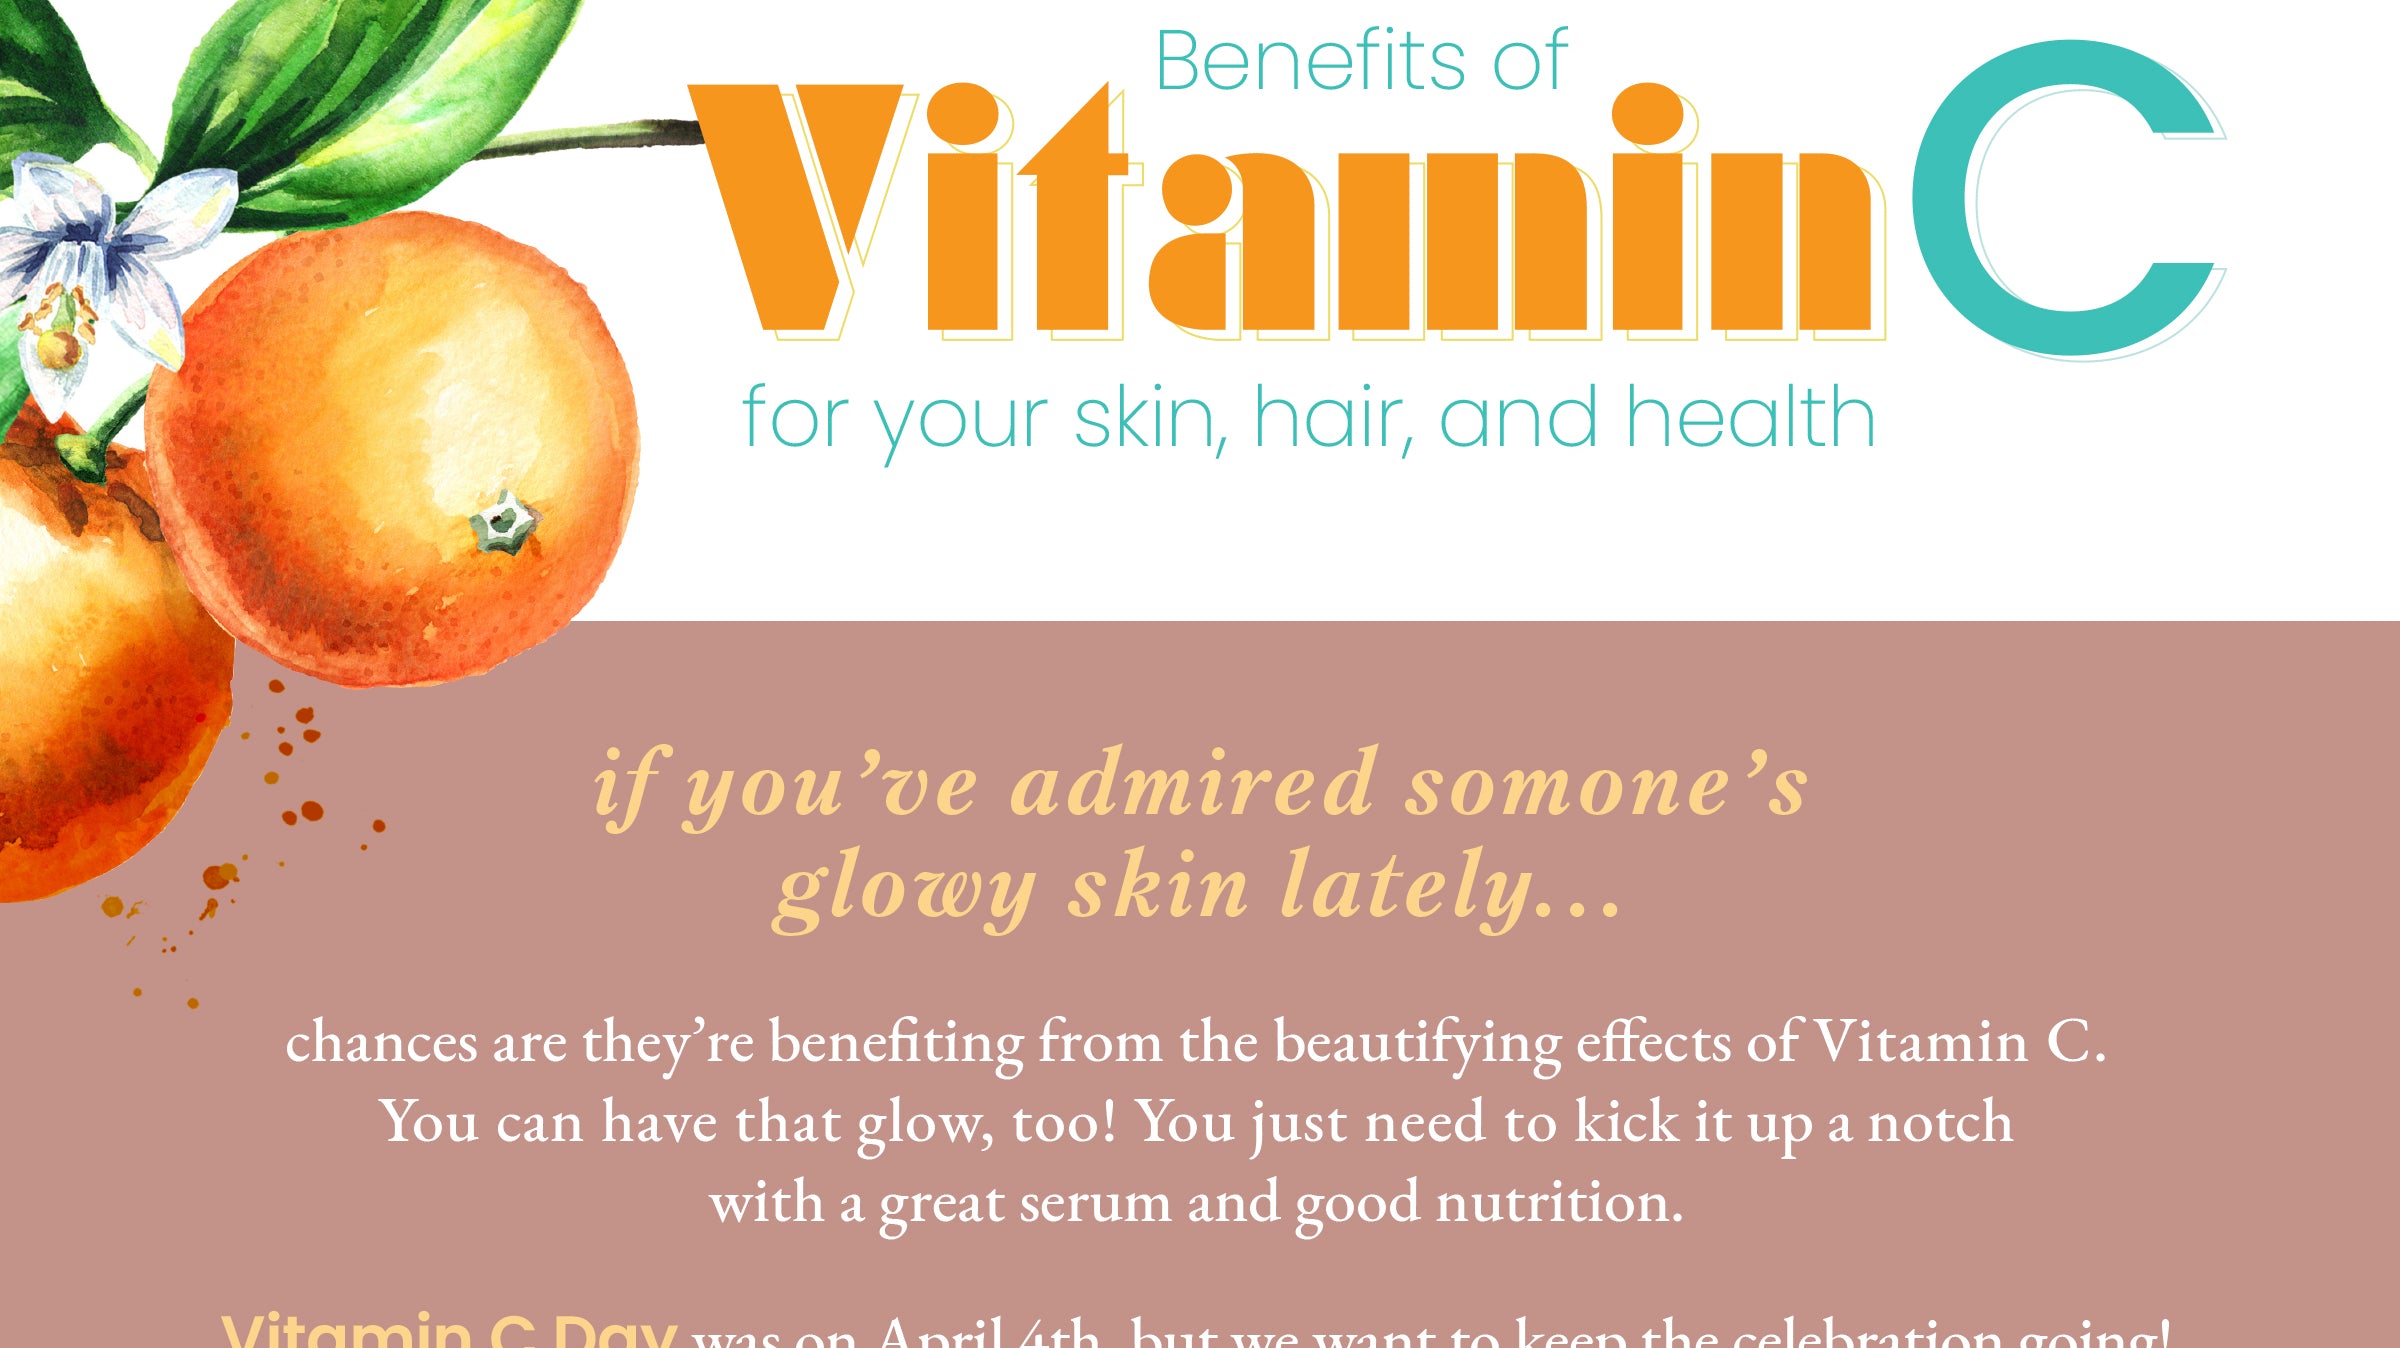 Vitamin C: How it Can Benefit Your Skin and Health 🍊